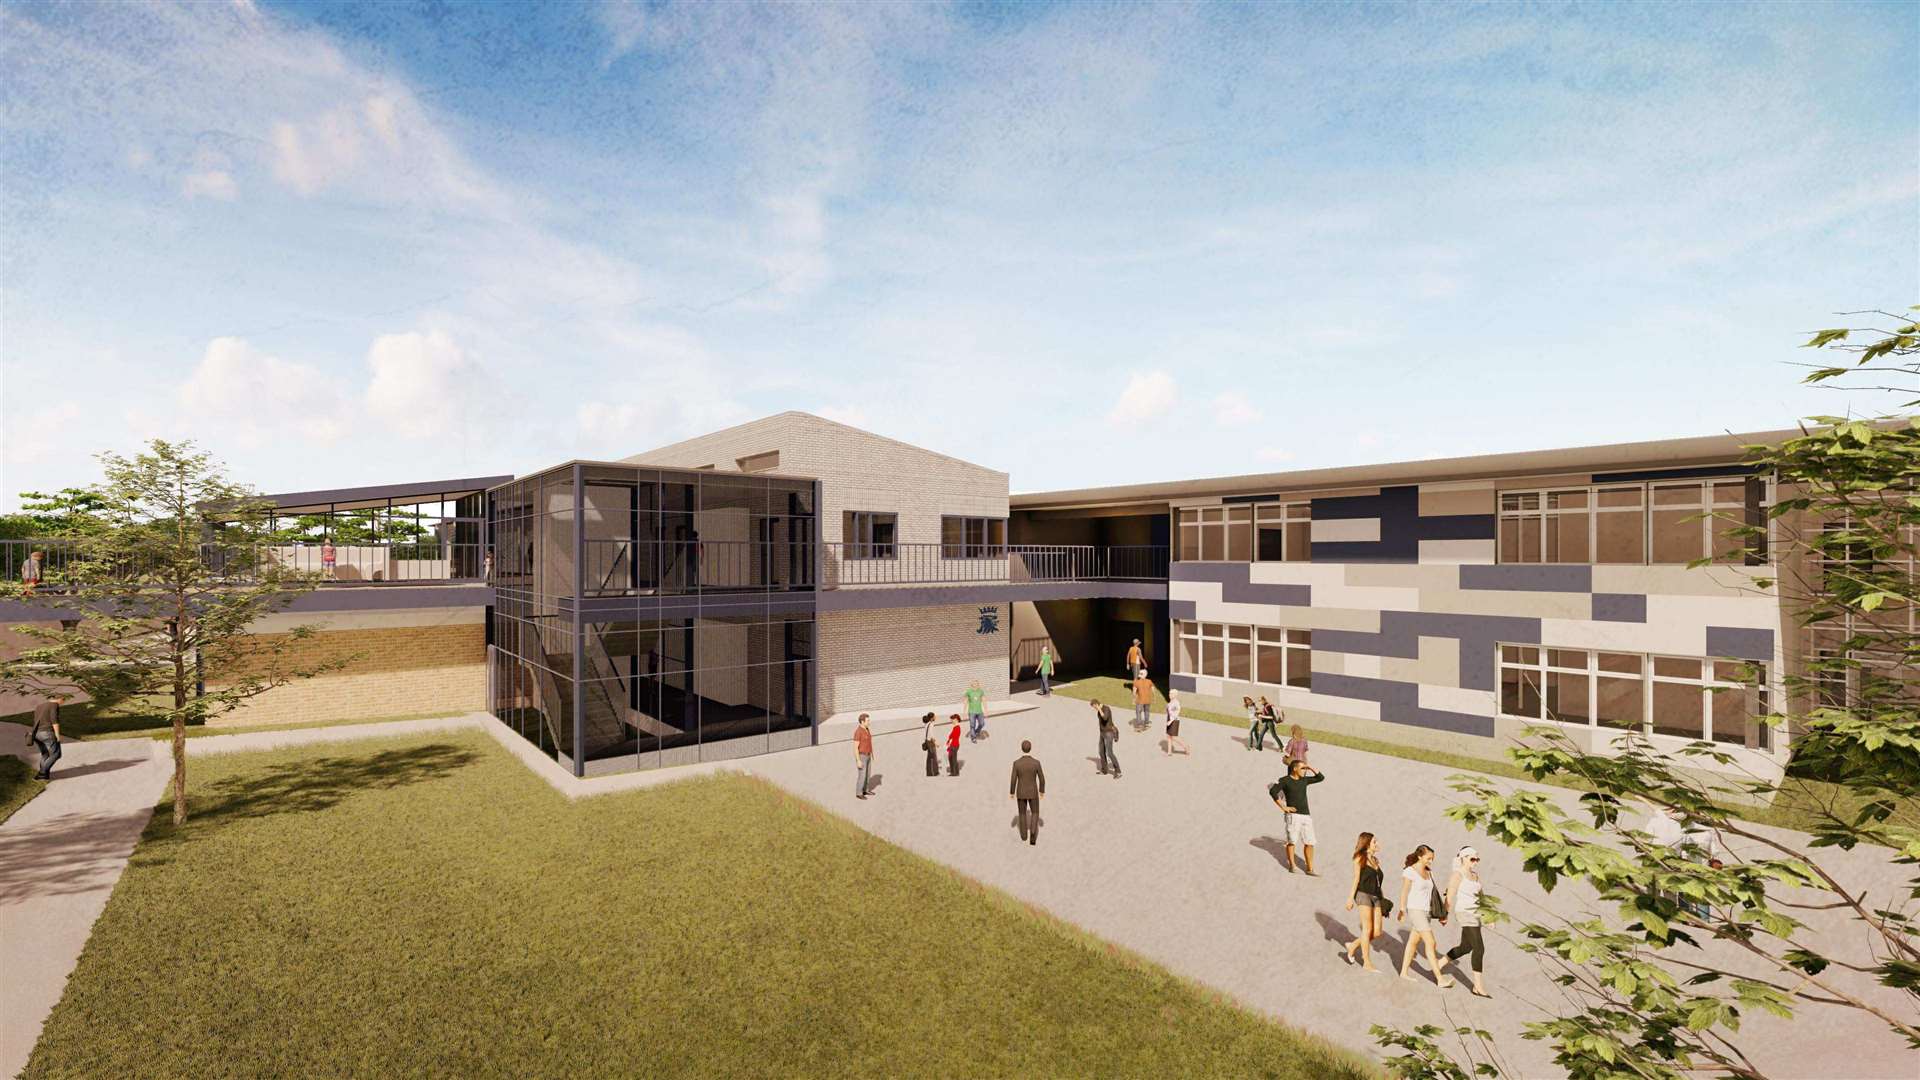 A skybridge is planned to link the new development to existing buildings at Queen Elizabeth's Grammar School in Faversham